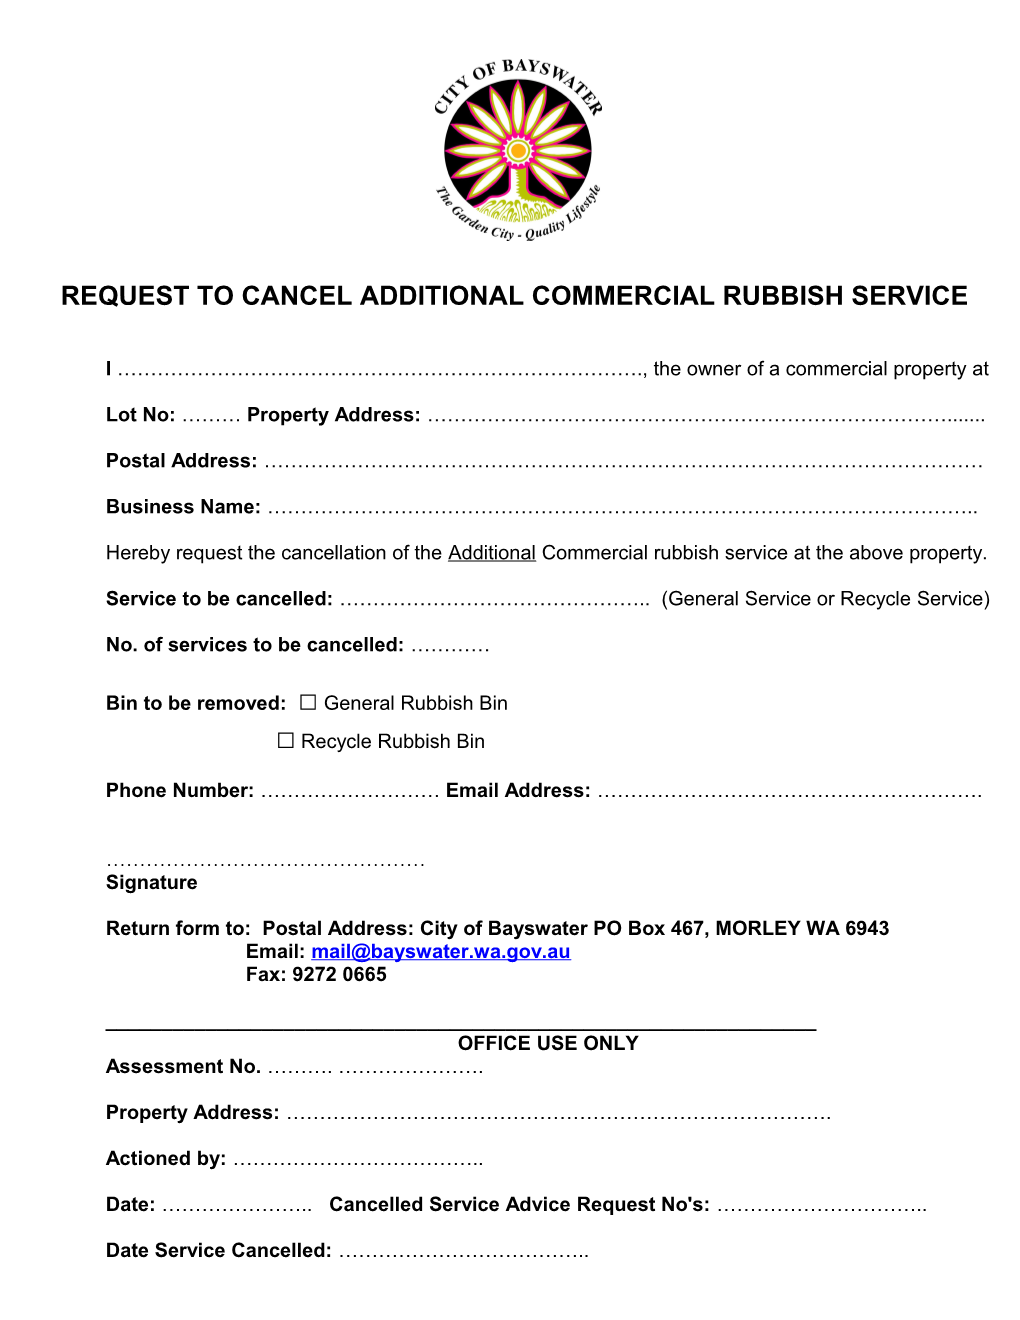 Request to Cancel Commercial Rubbish Service Form